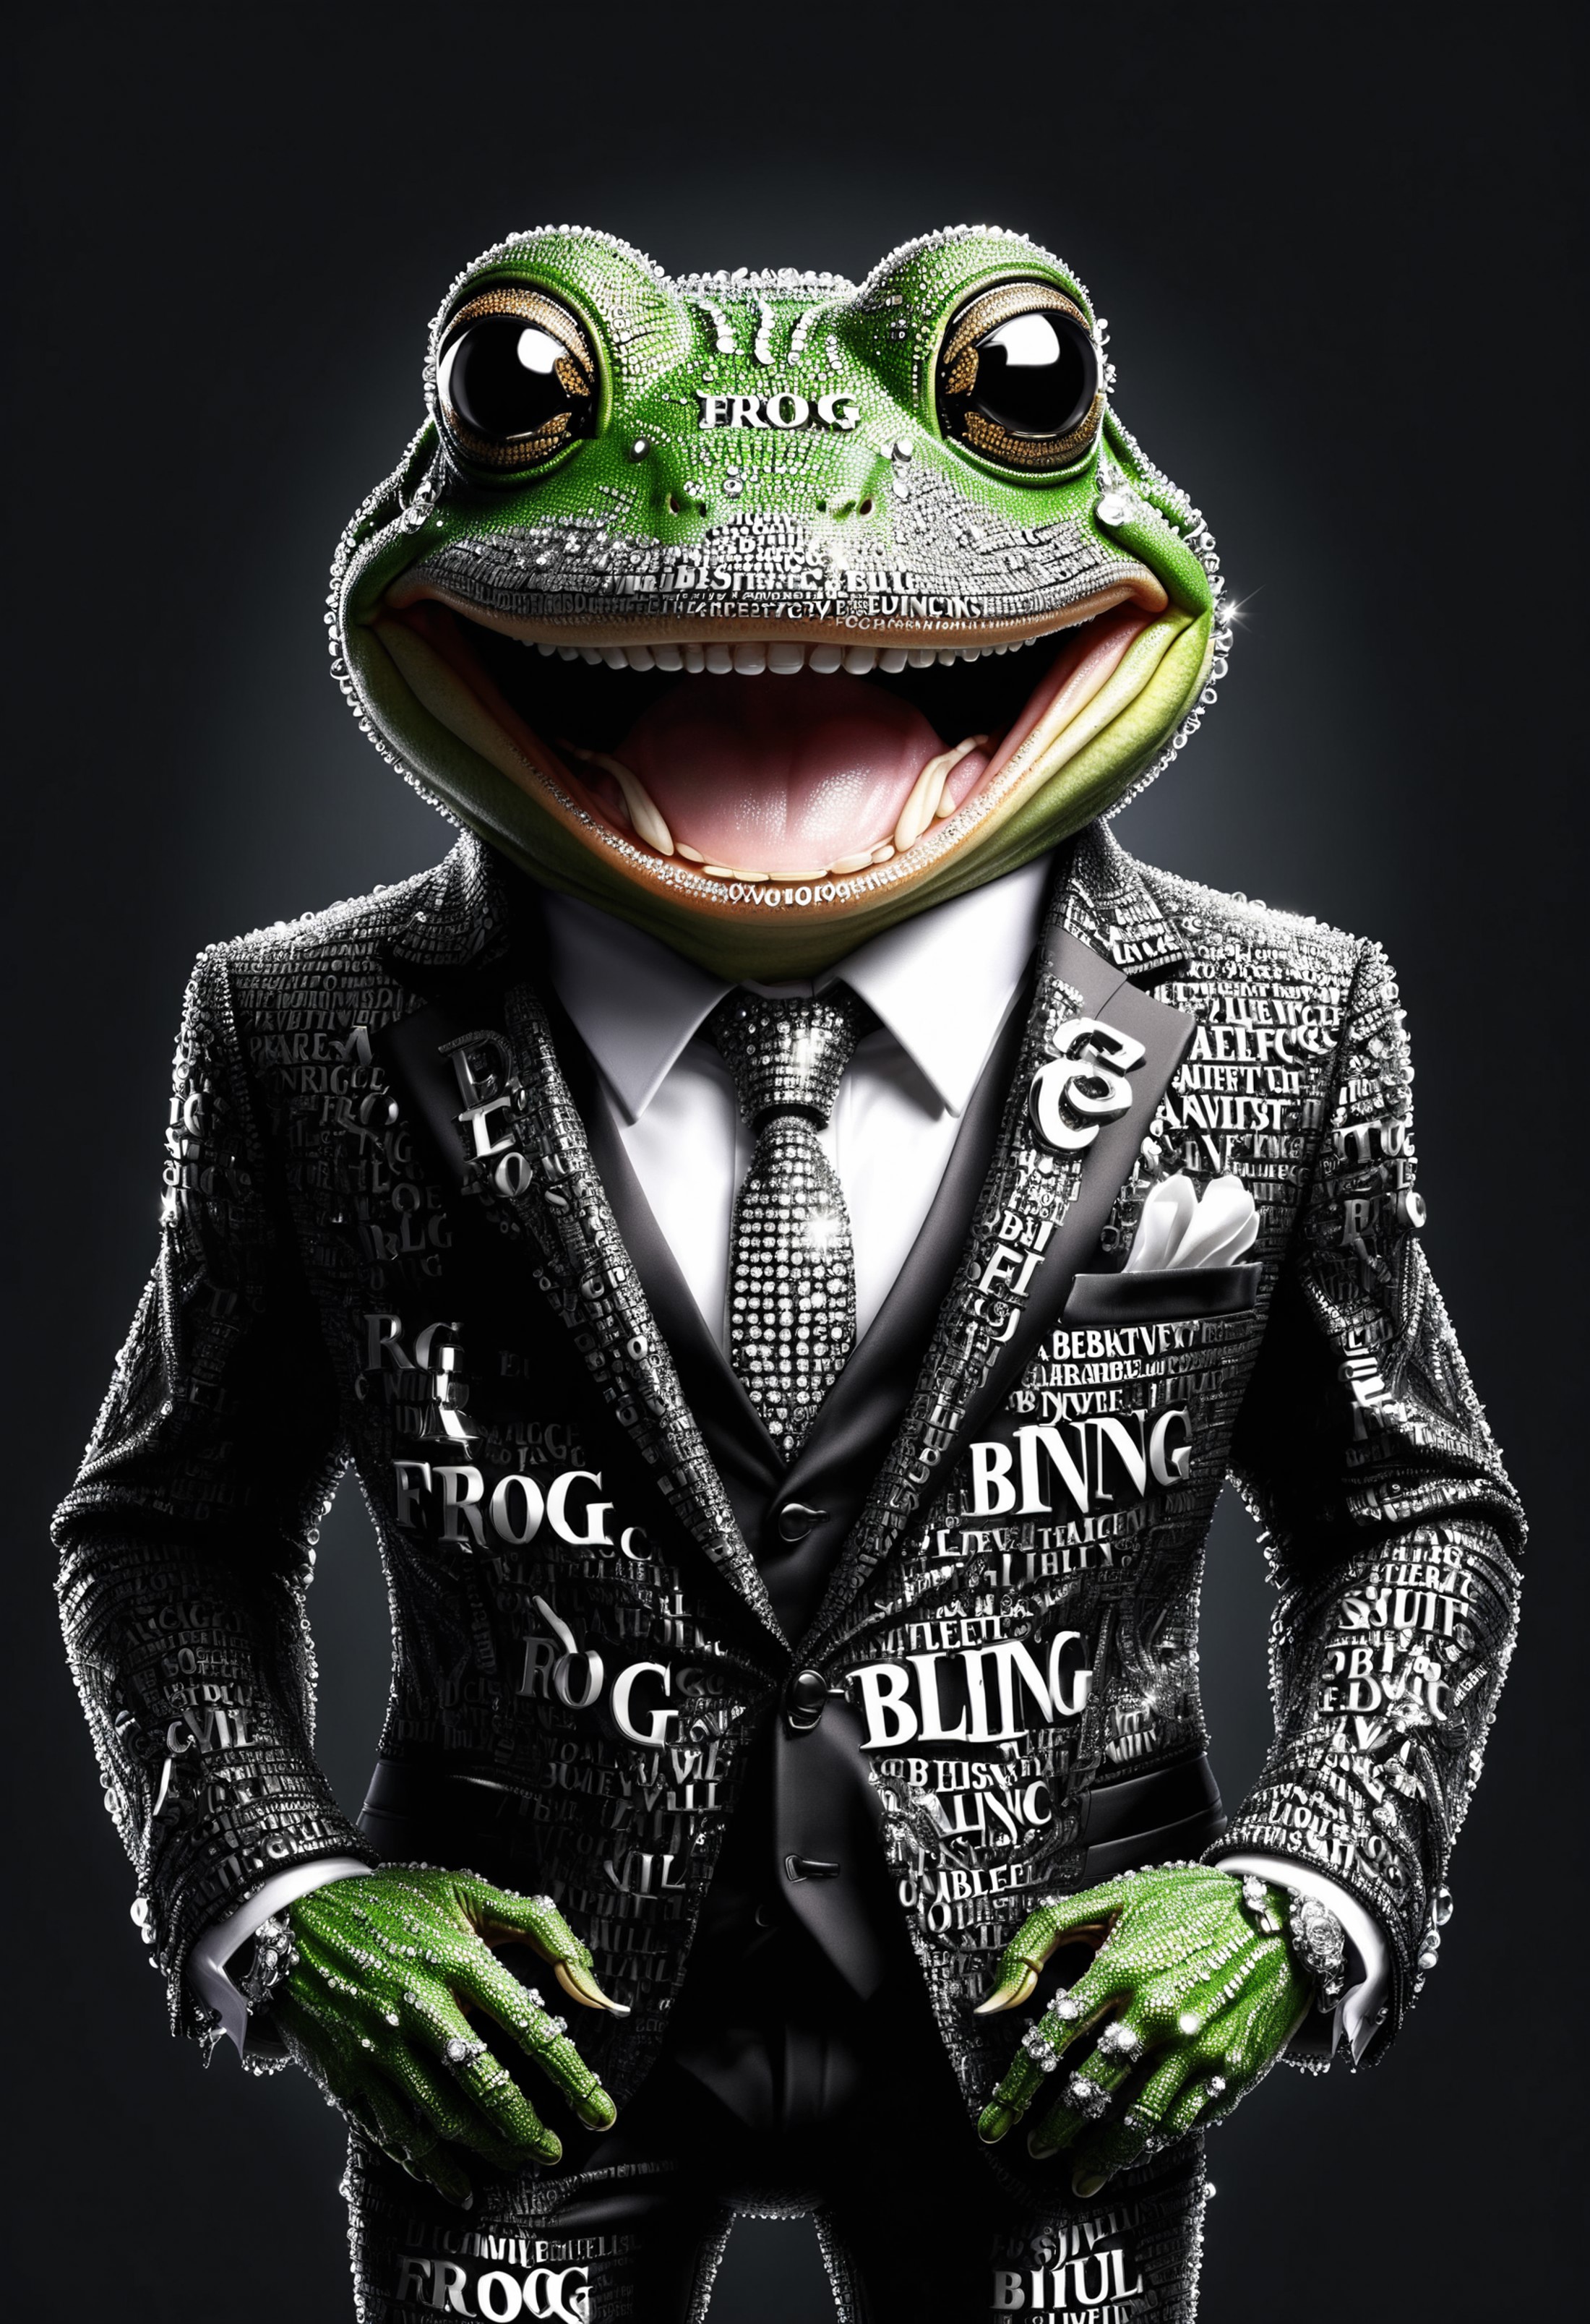 dvr-txt frog with a large smile, teeth made of diamonds, wearing a black suit, text logo "BLING" <lora:dvr-txt:1>